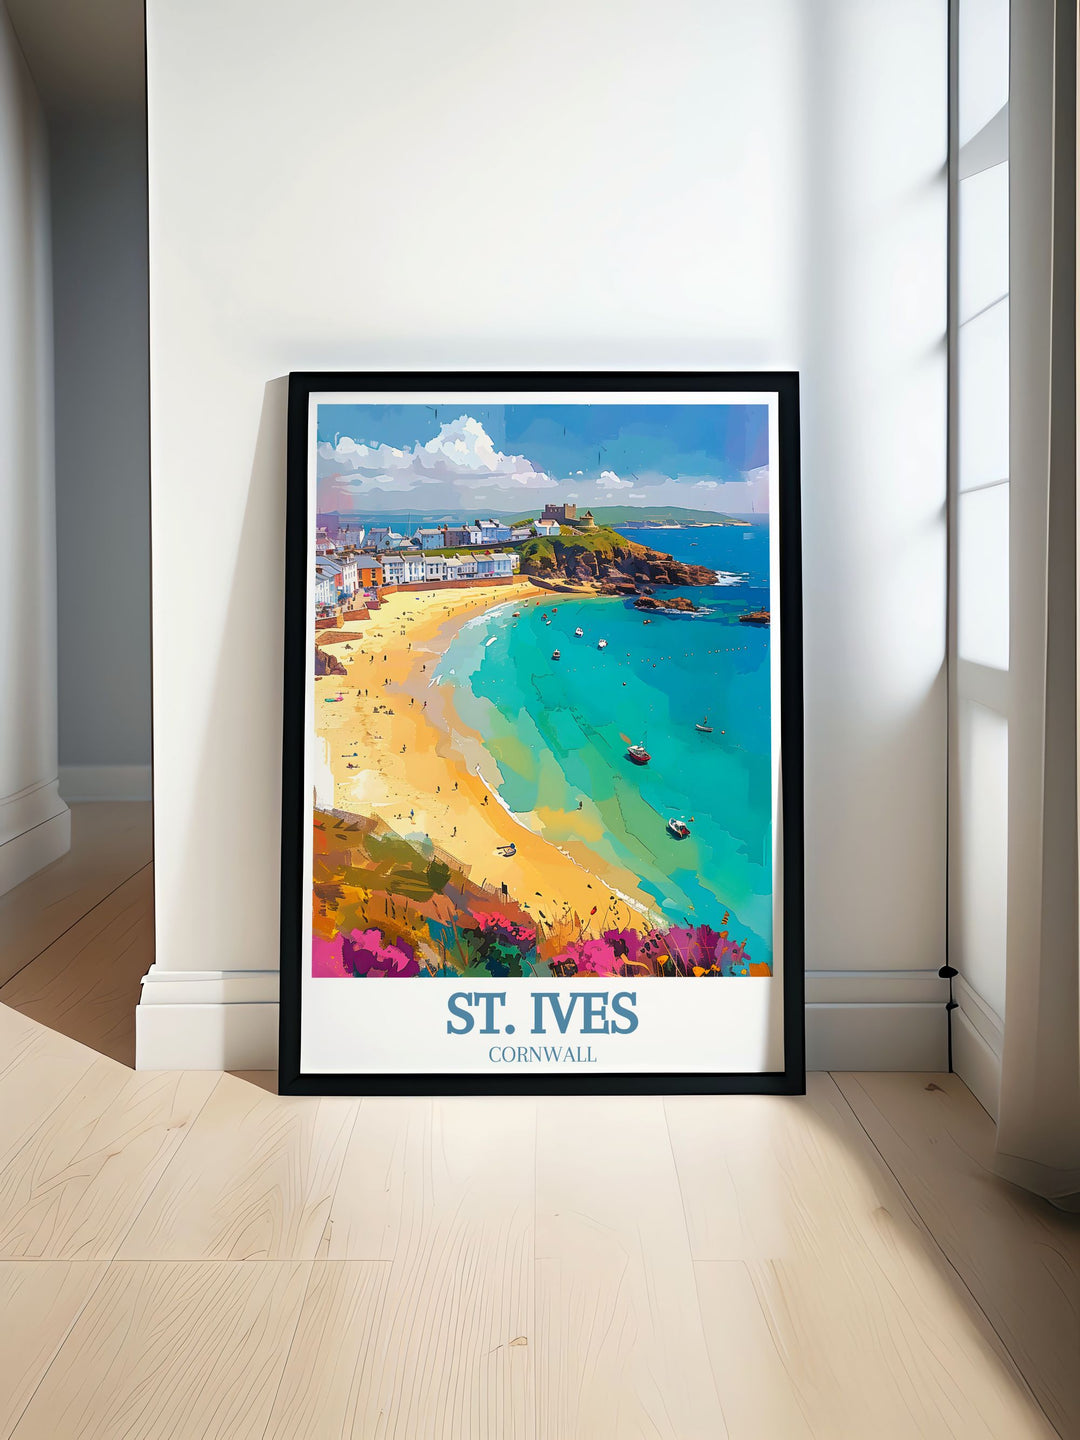 This travel poster beautifully captures the historic charm and coastal beauty of St. Ives and Porthmeor Beach, inviting viewers to explore this iconic Cornish destination.